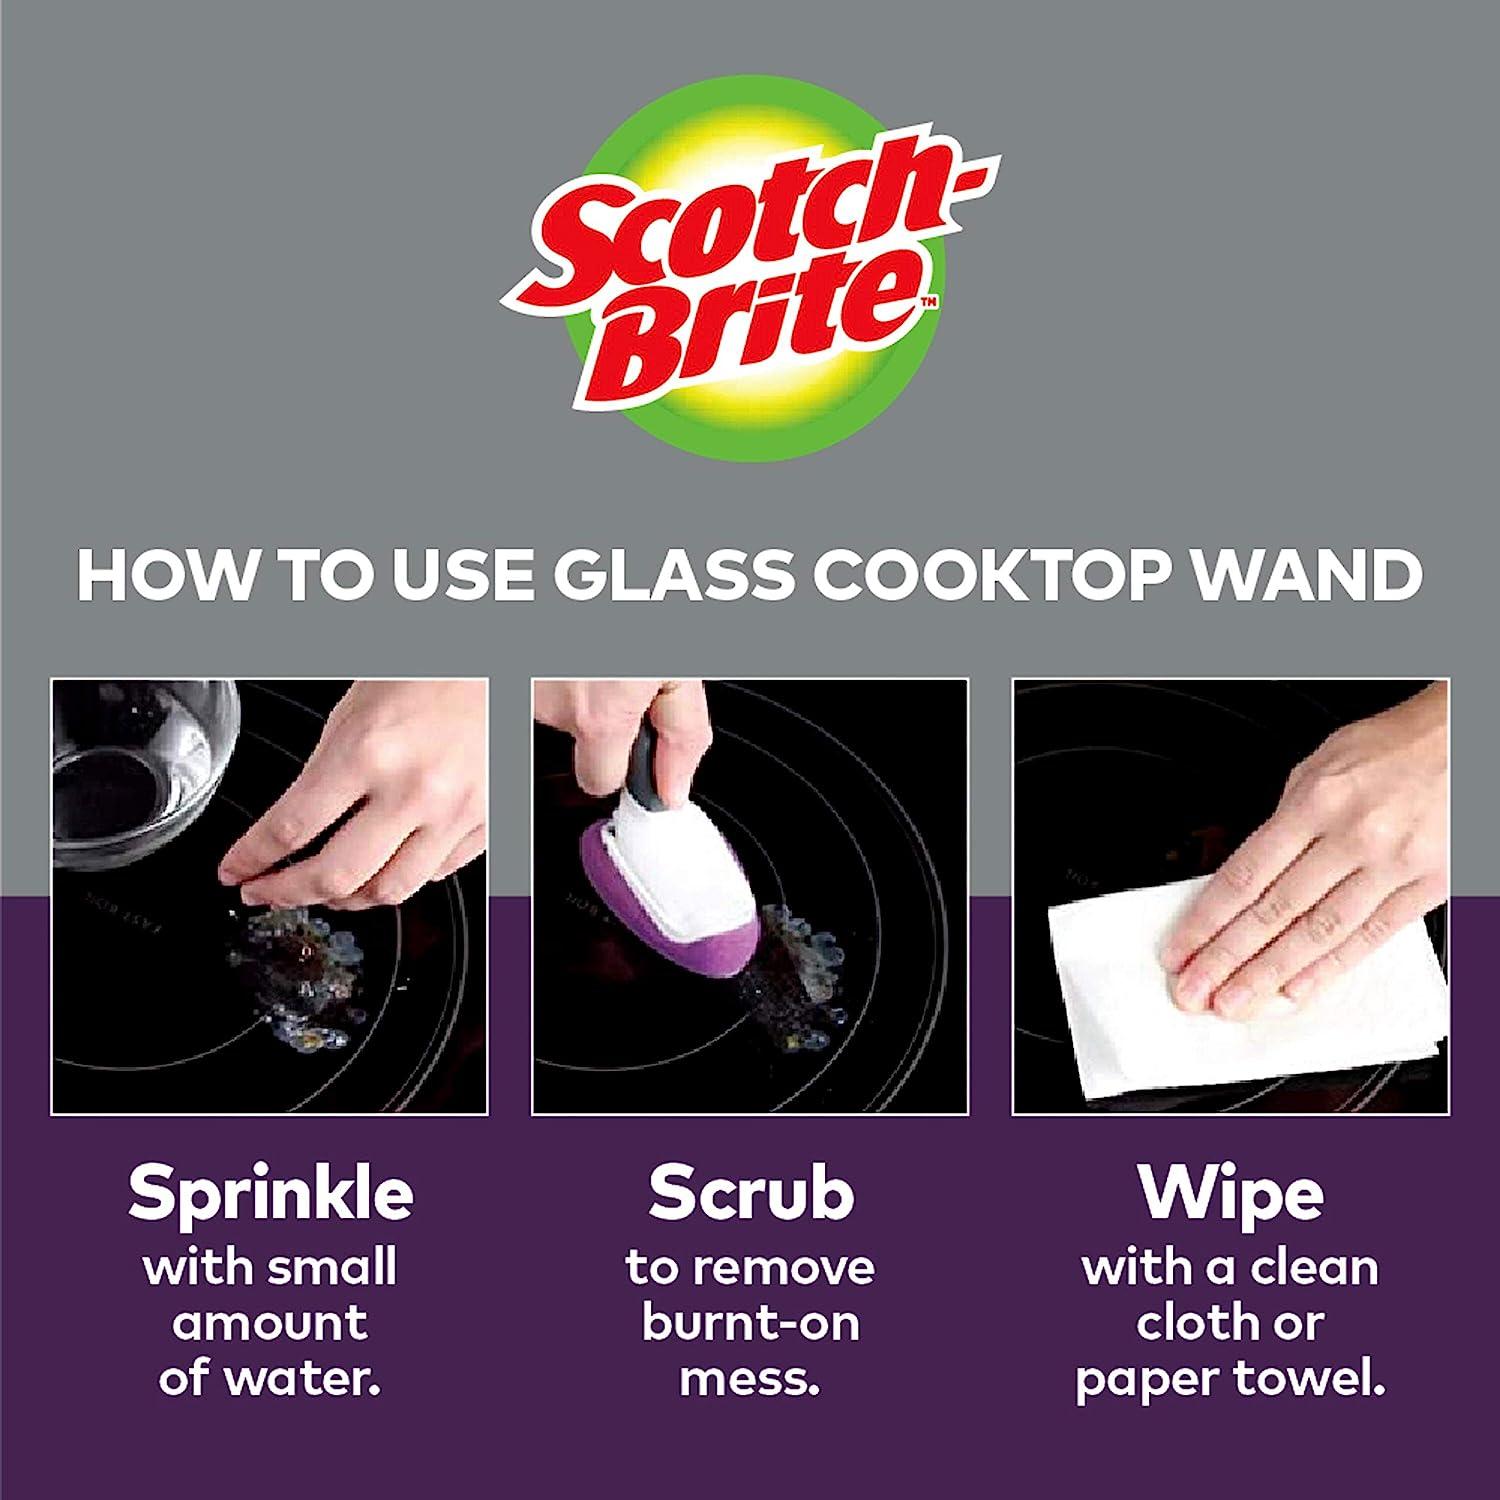 Scotch-Brite Non-Scratch Sponge Wand for Glass Cooktop, 1 ct - Food 4 Less